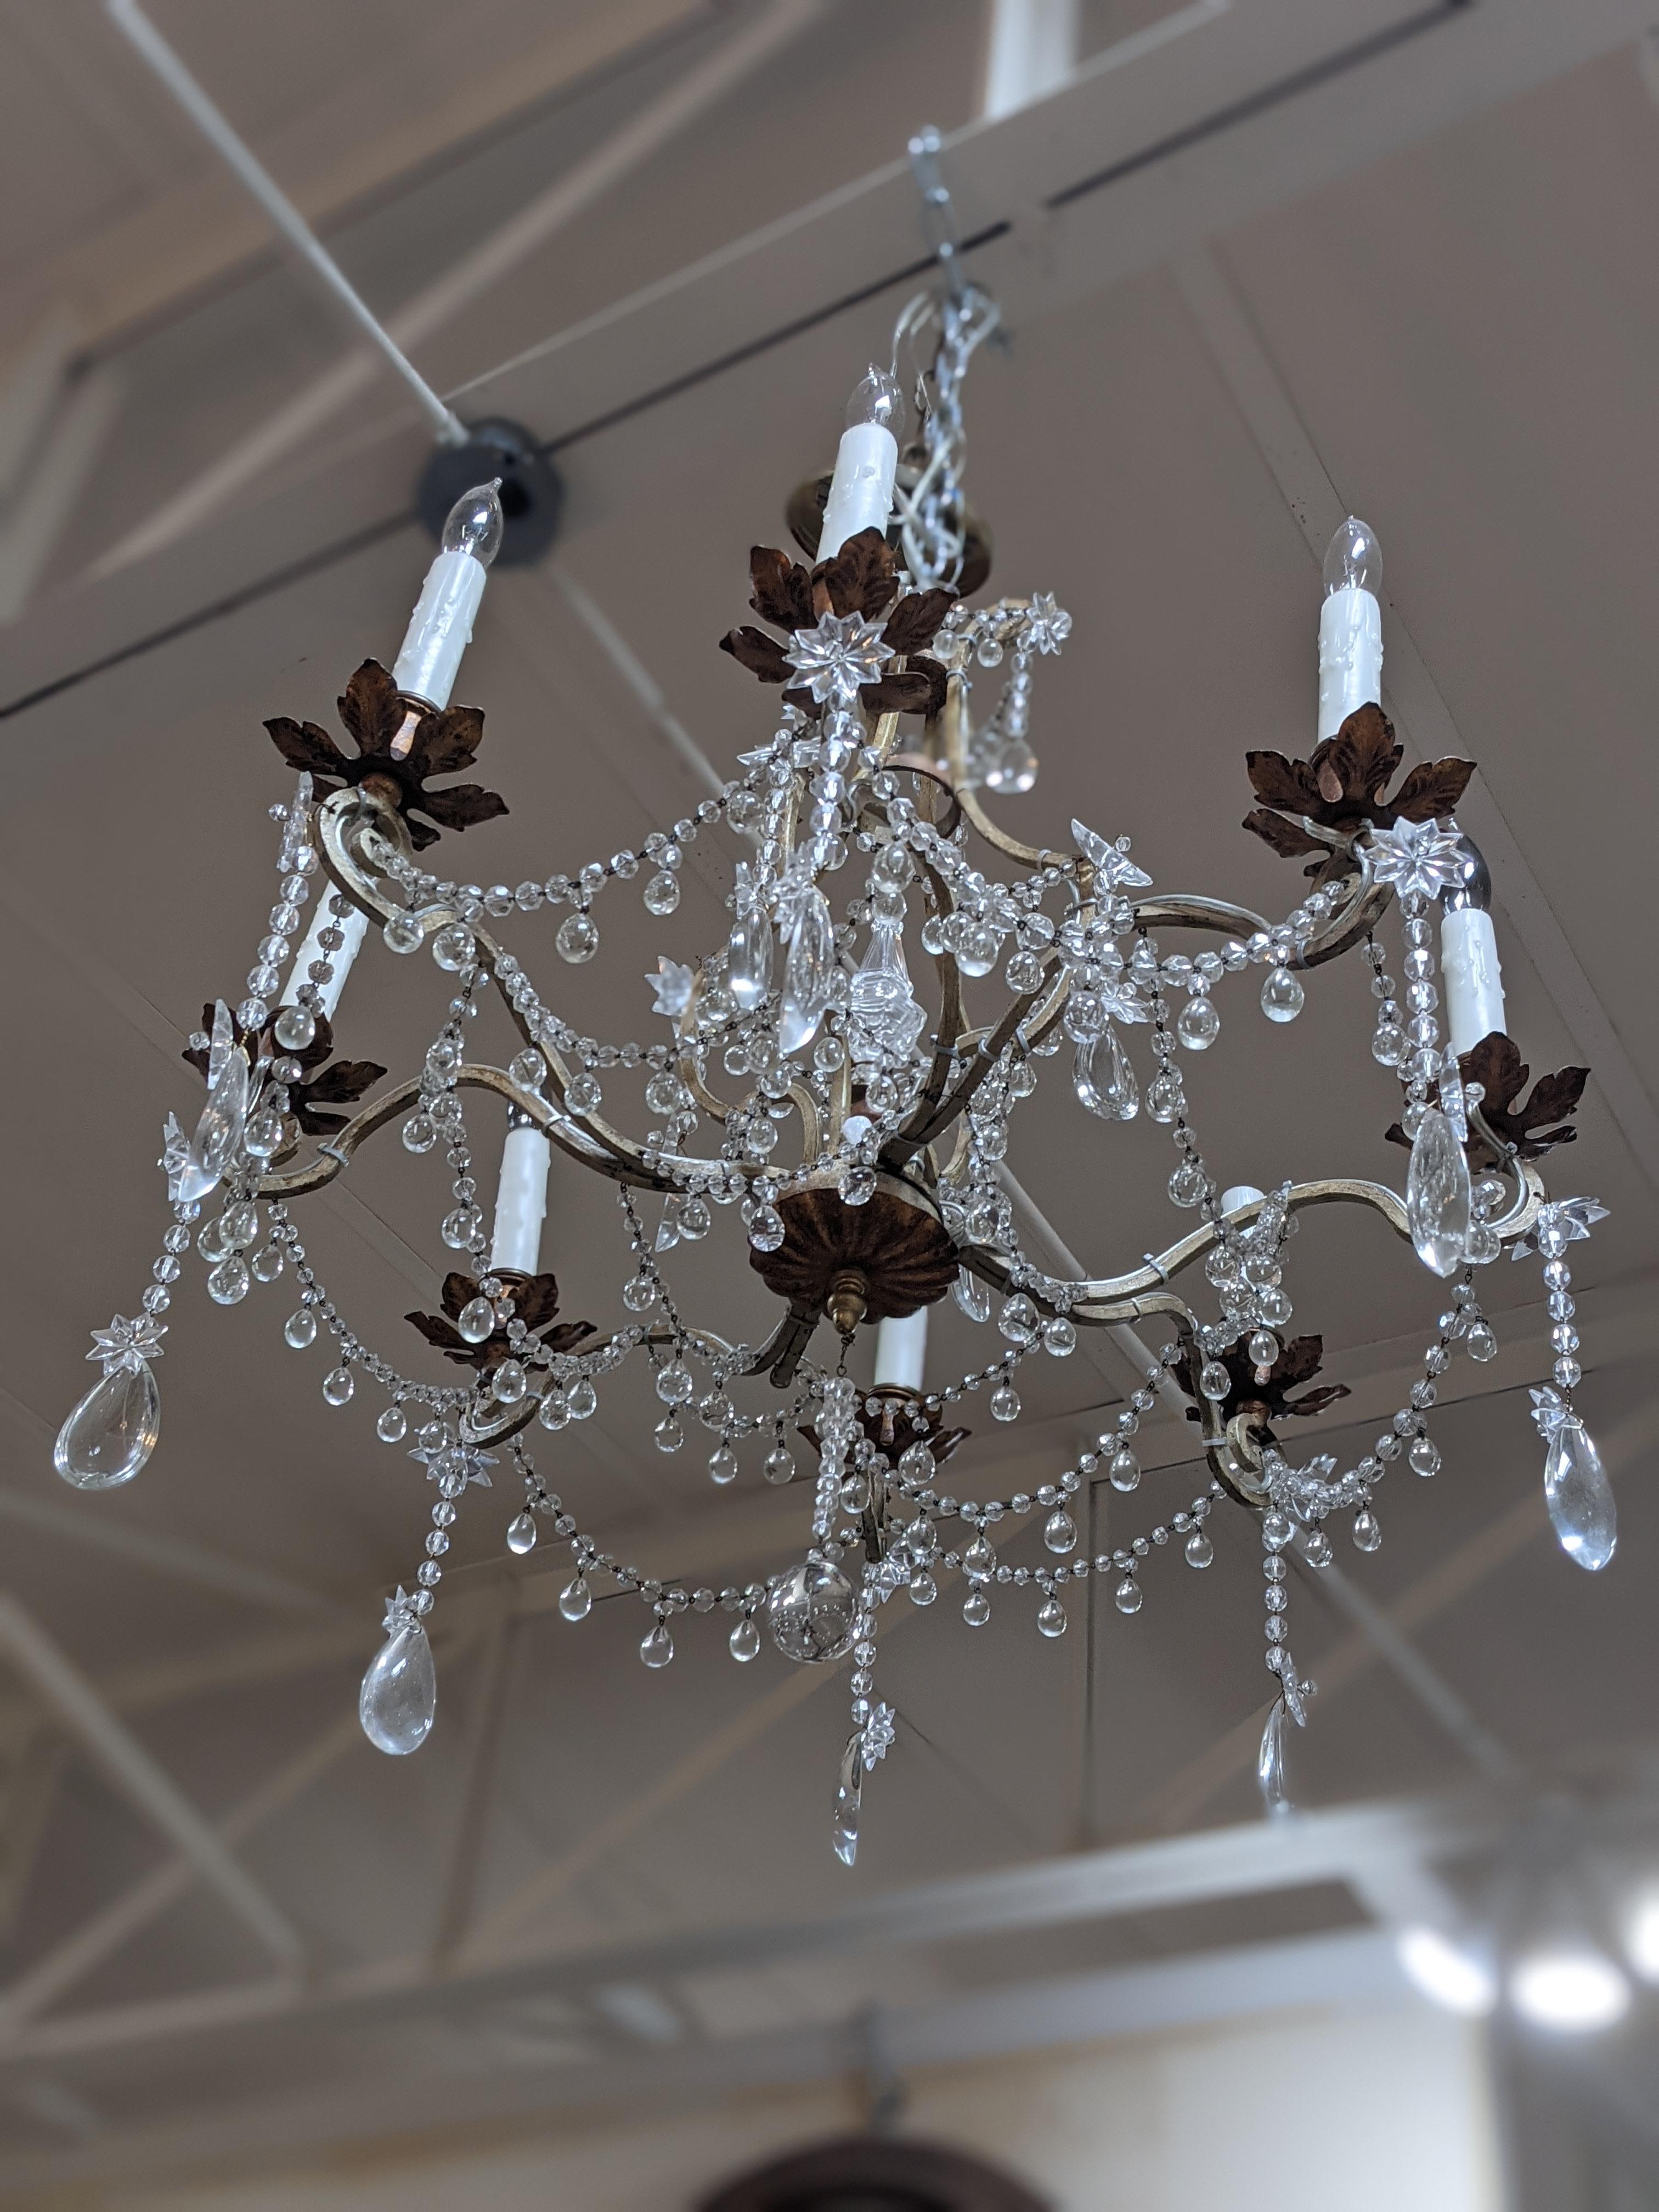 This bronze and crystal chandelier origins from France.

19th century period.